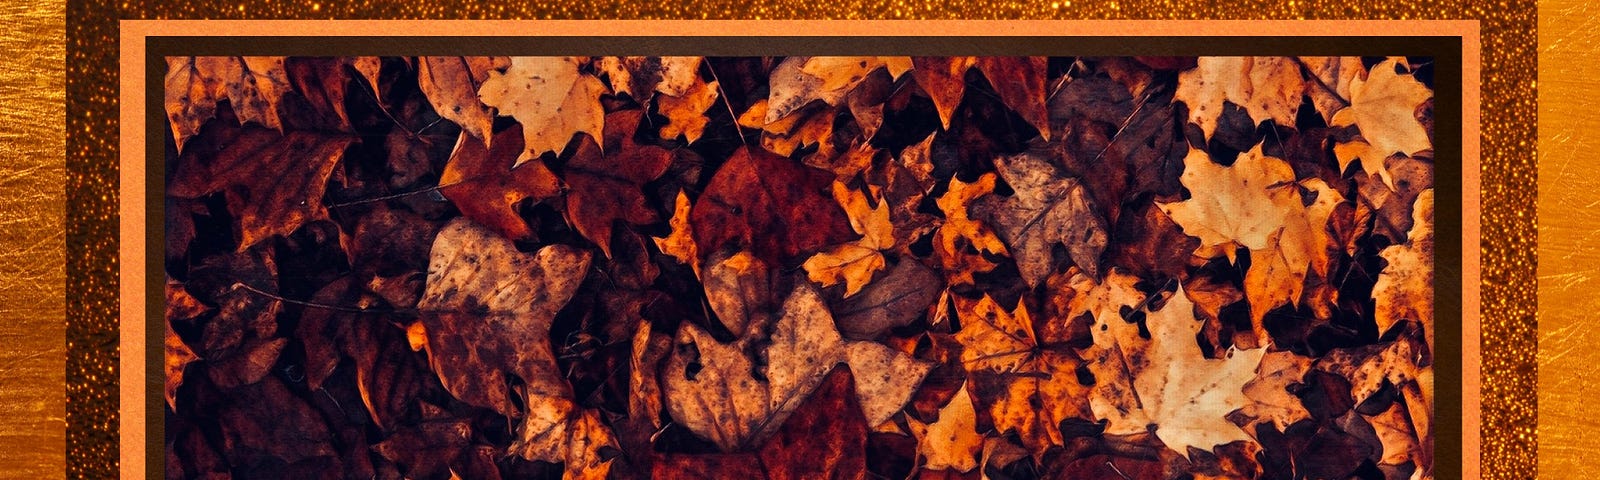 Fallen leaves in tones of brown, gold, and orange